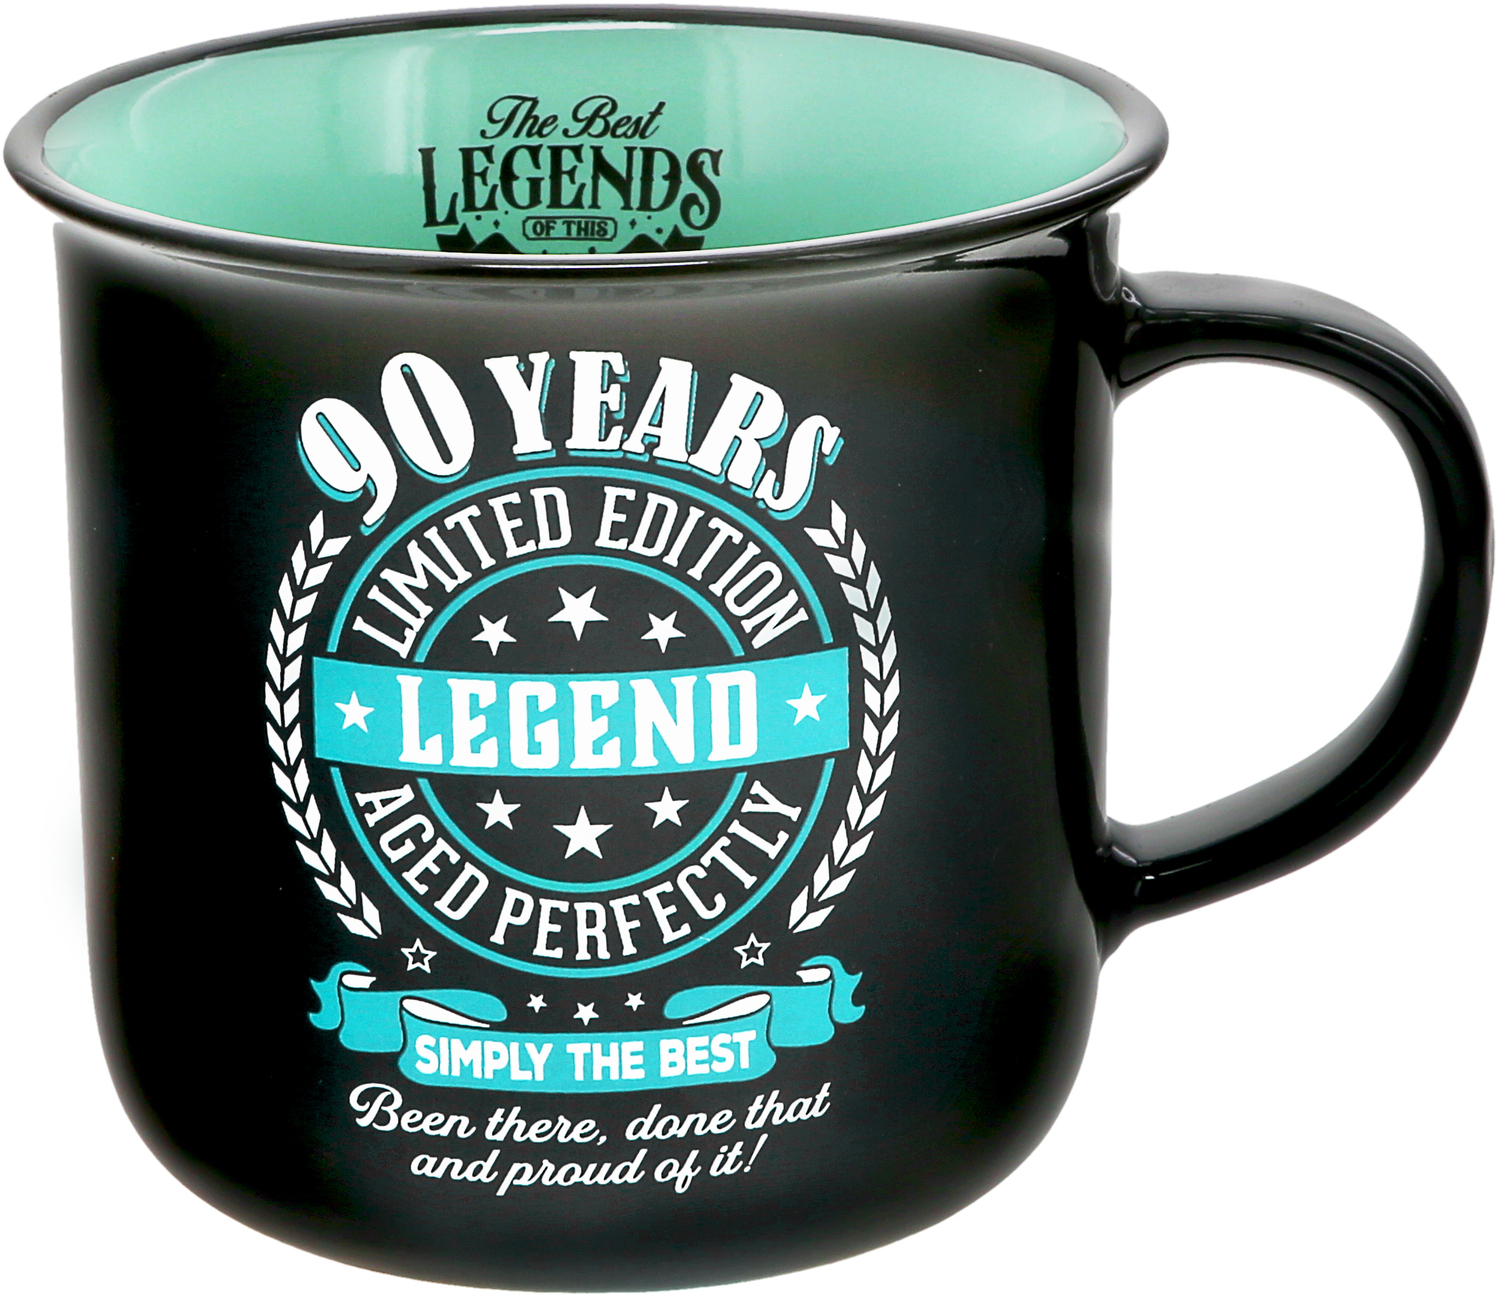 90 Years by Legends of this World - 90 Years - 13 oz Mug